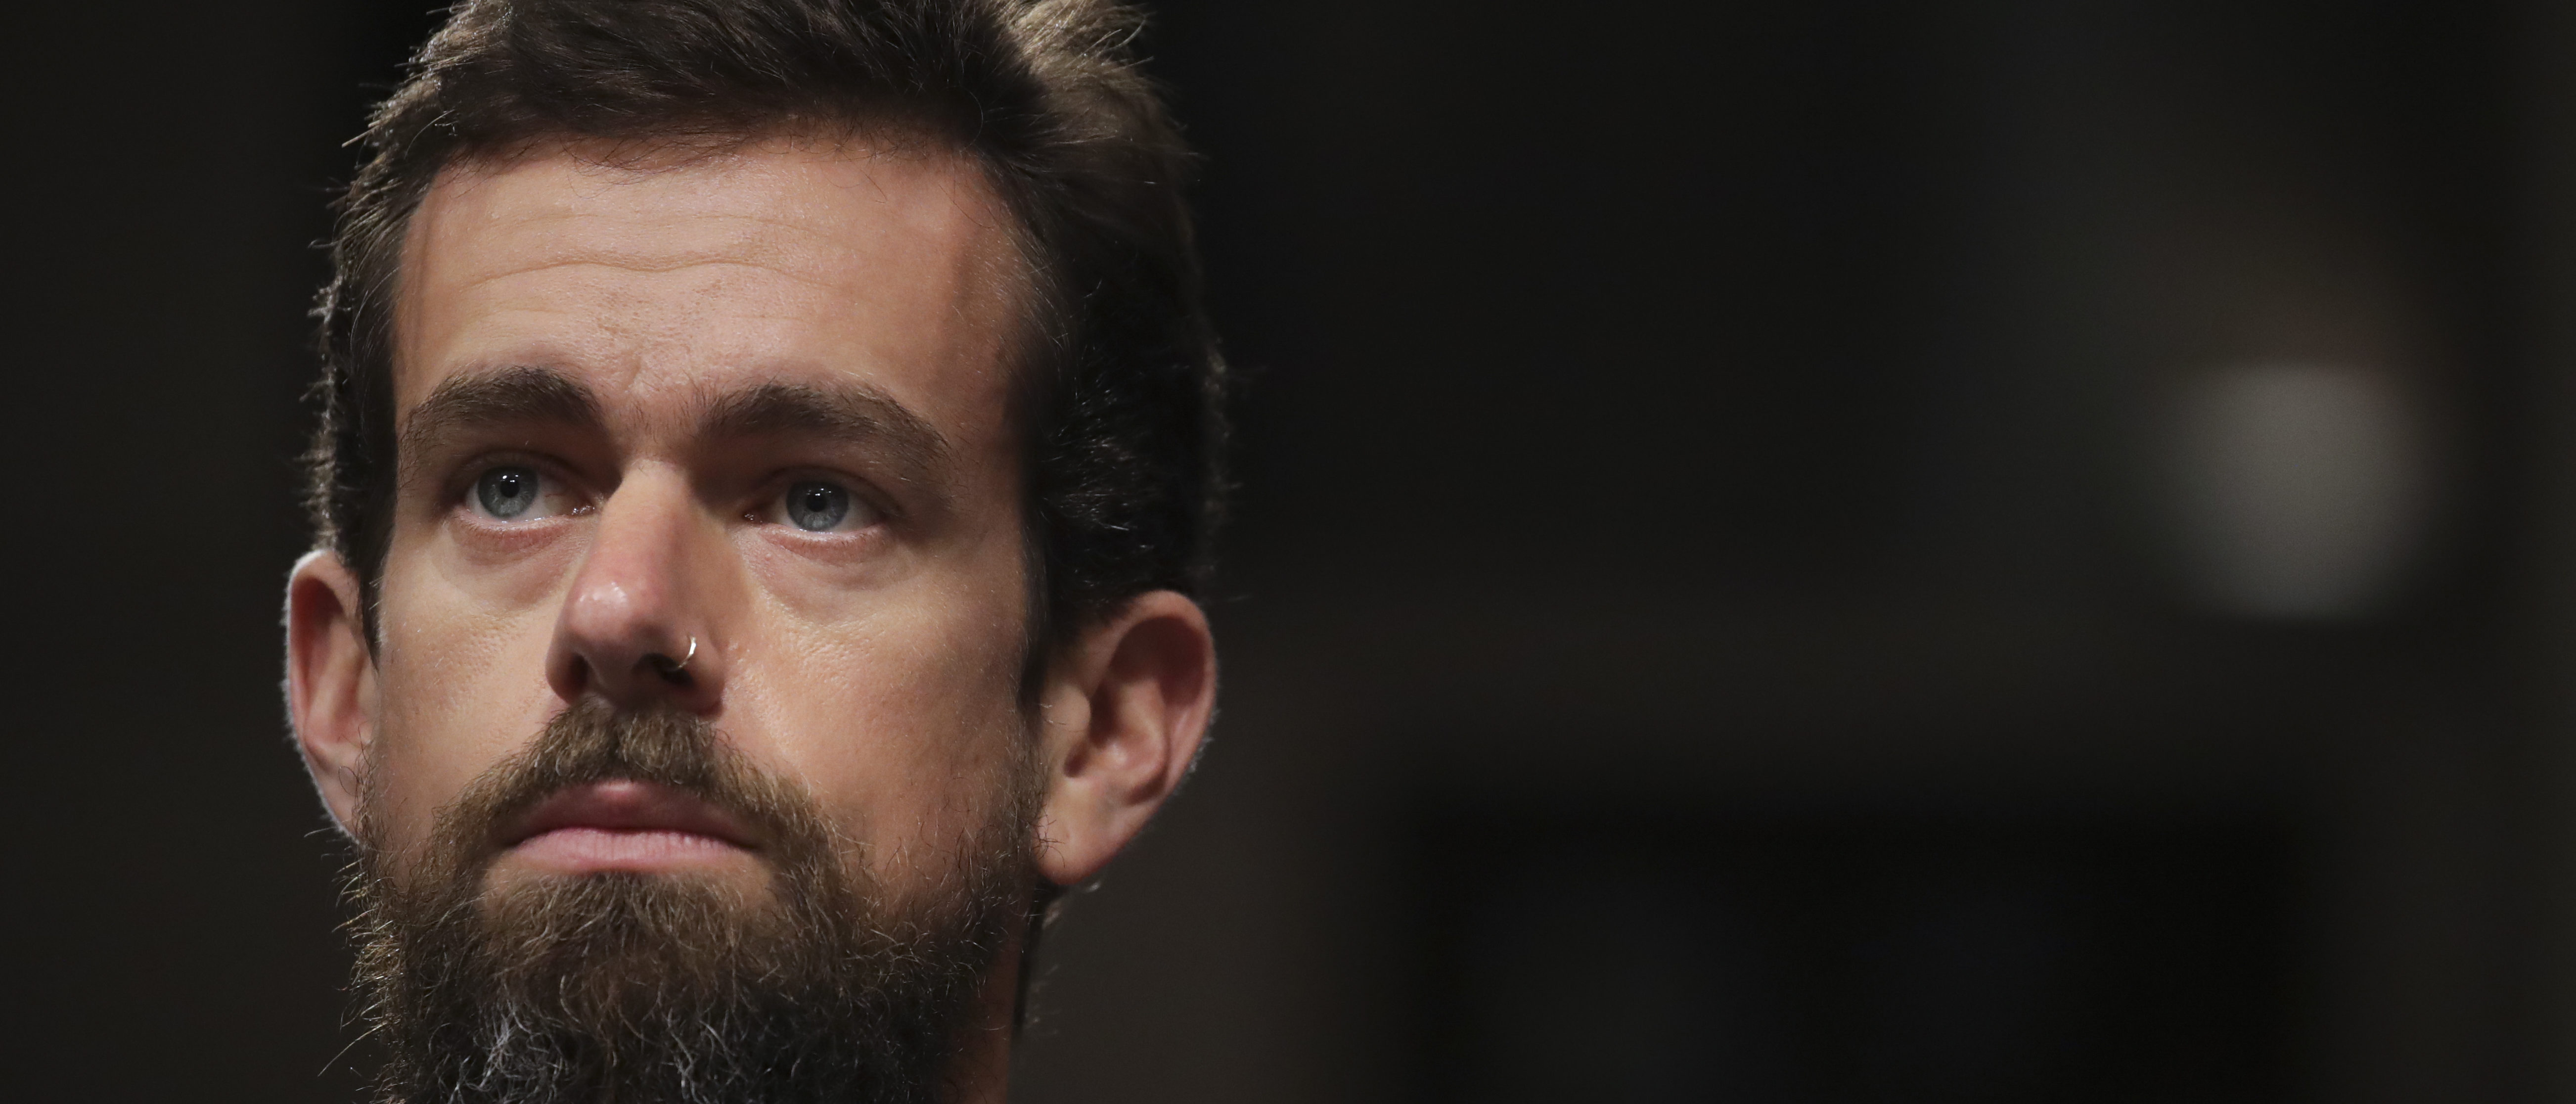 Twitter chief executive officer Jack Dorsey looks on during a Senate Intelligence Committee hearing concerning foreign influence operations' use of social media platforms, on Capitol Hill, September 5, 2018 in Washington, DC. (Drew Angerer/Getty Images)